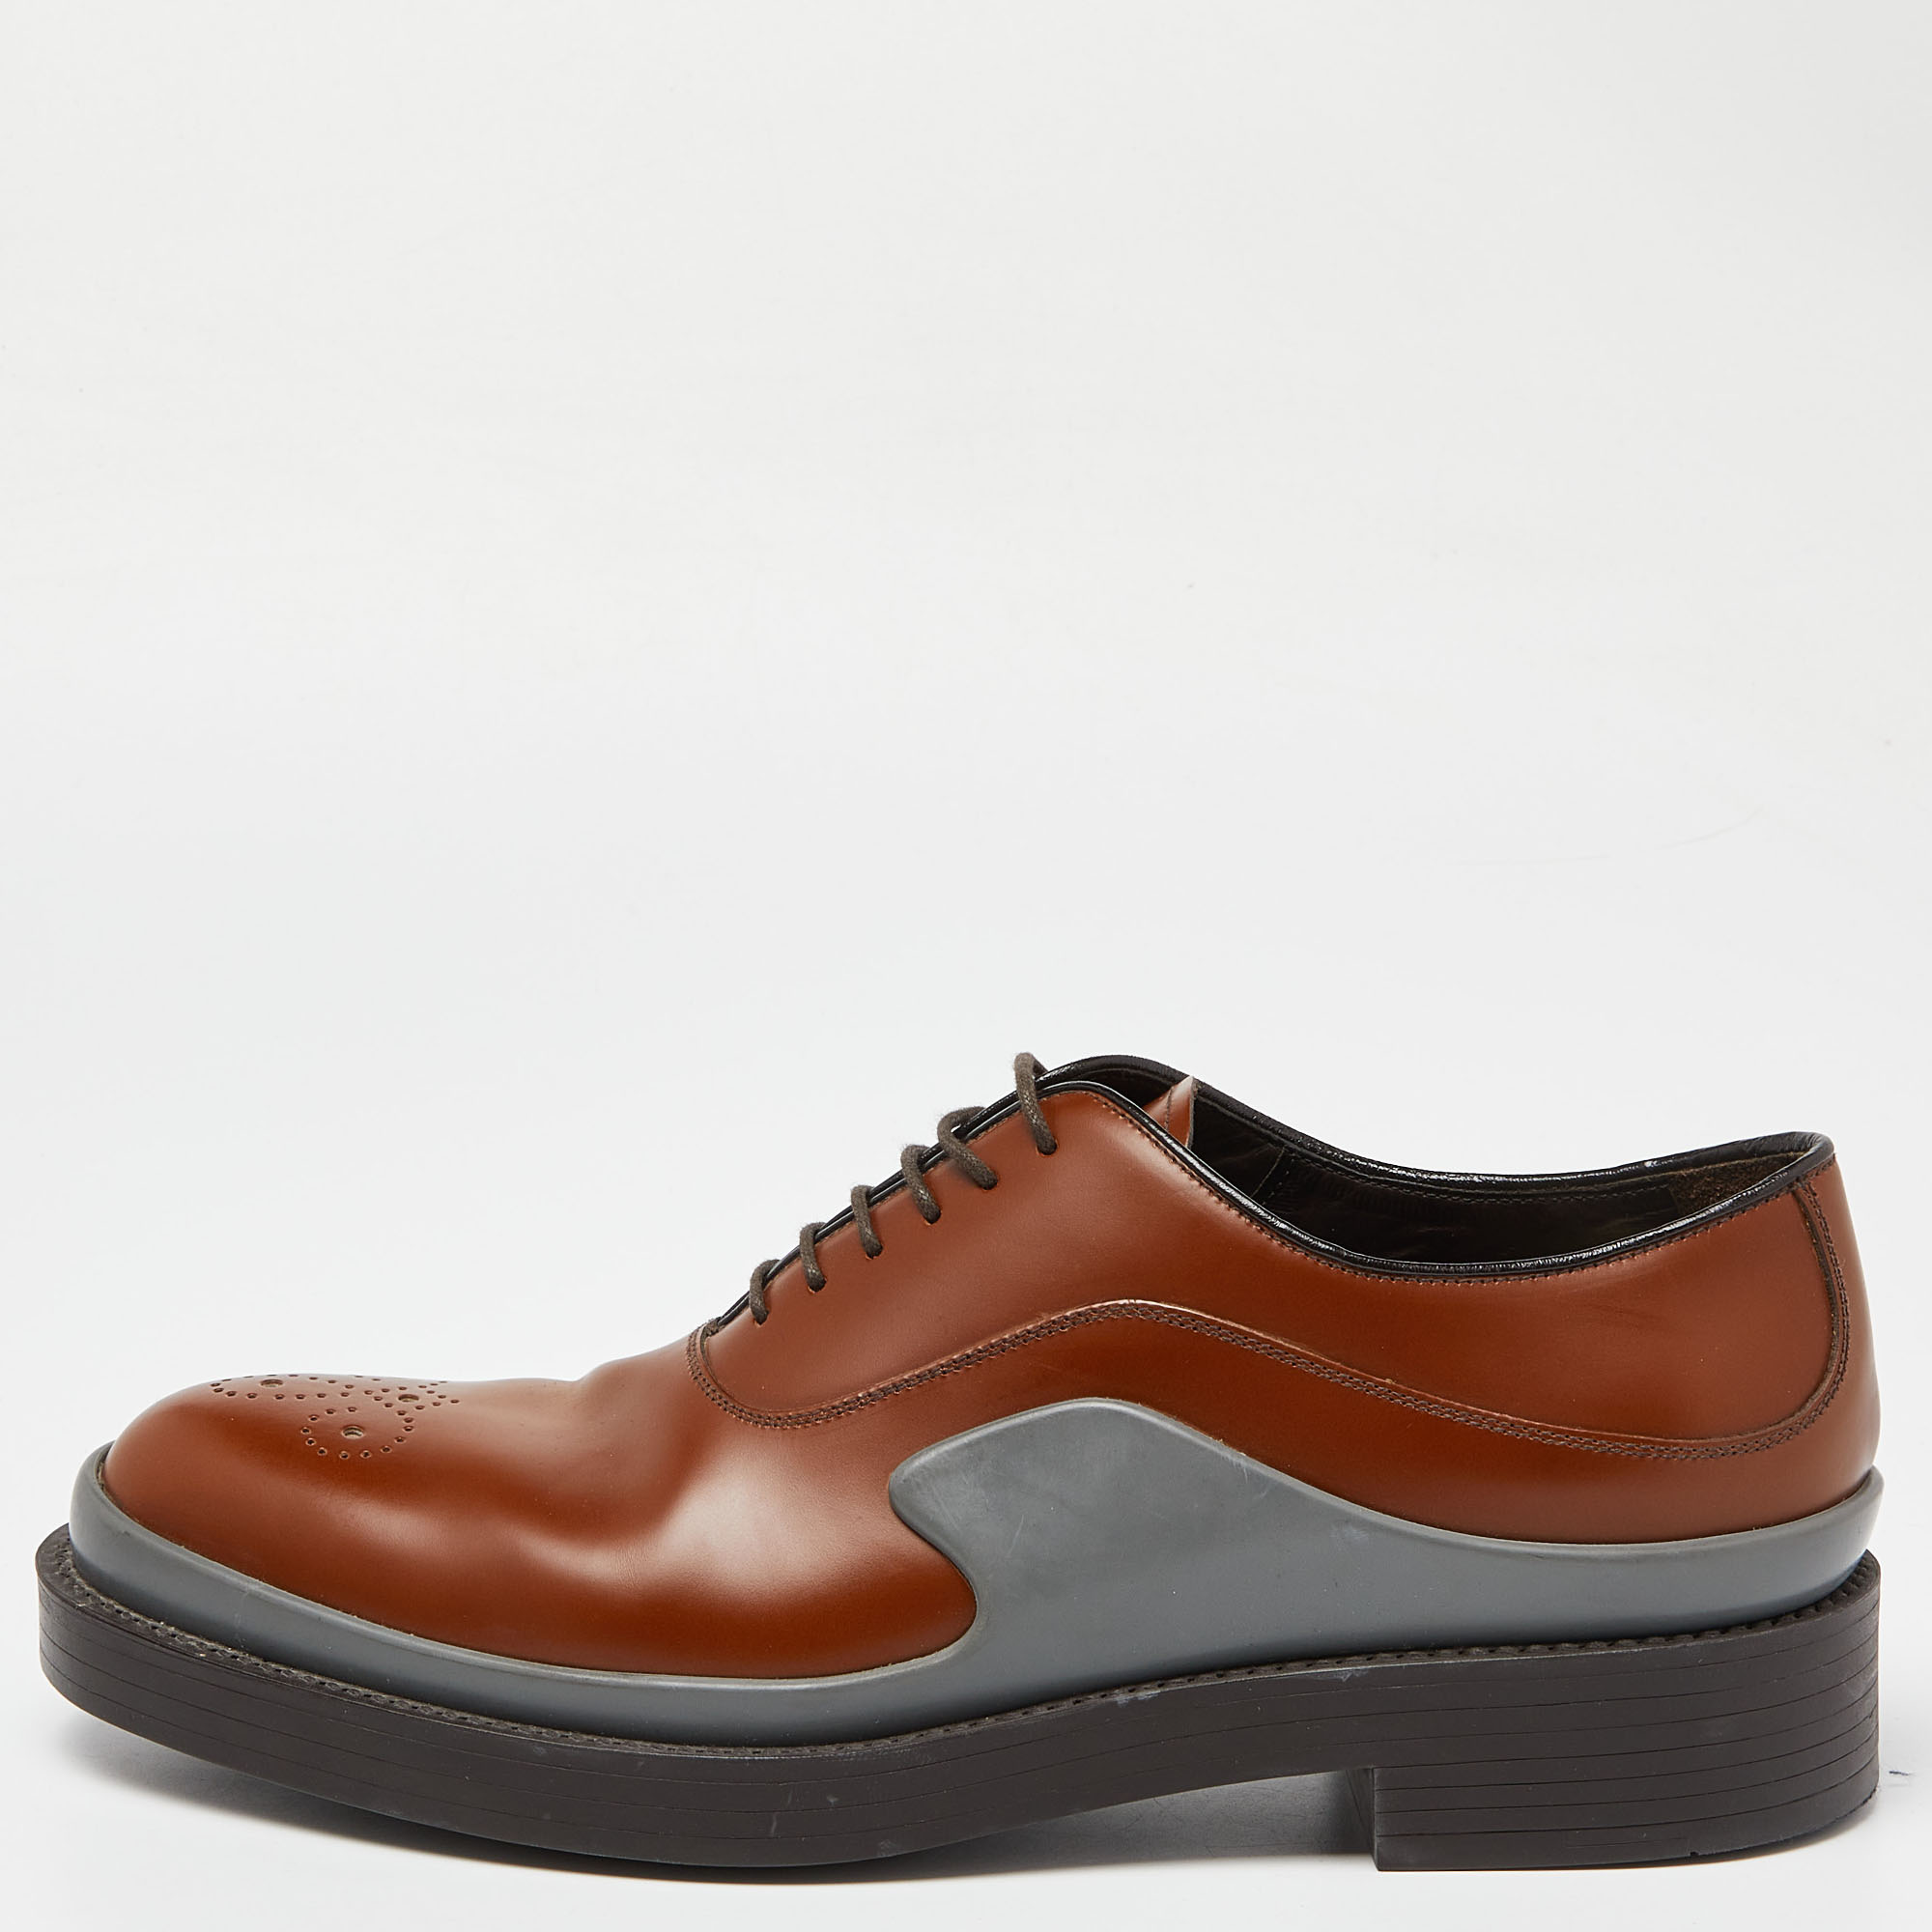 Prada Brown Leather Lace Up Oxfords Size 43.5